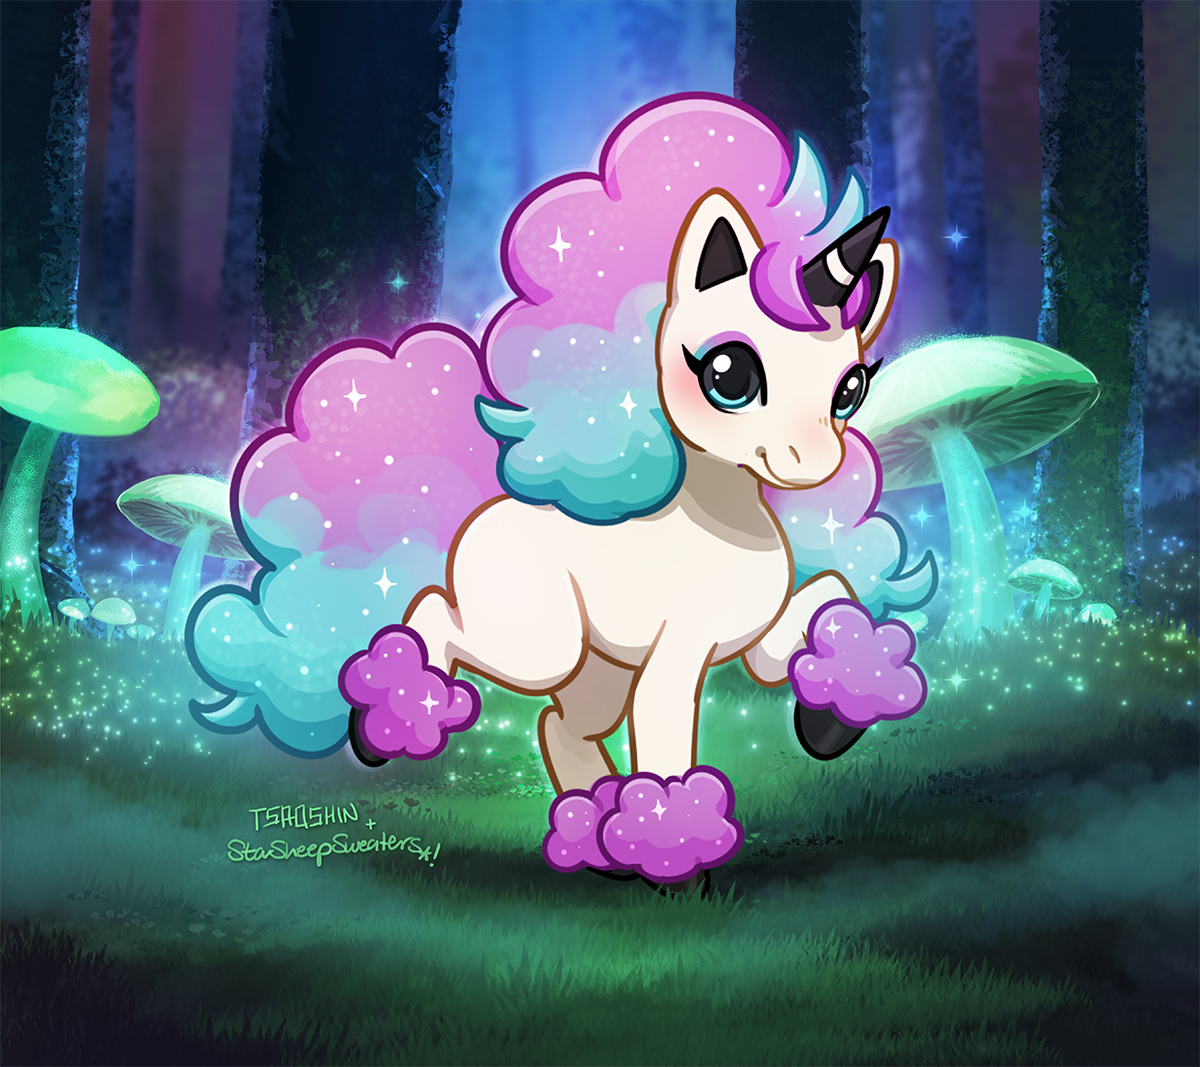 Ponyta (Character) – aniSearch.com